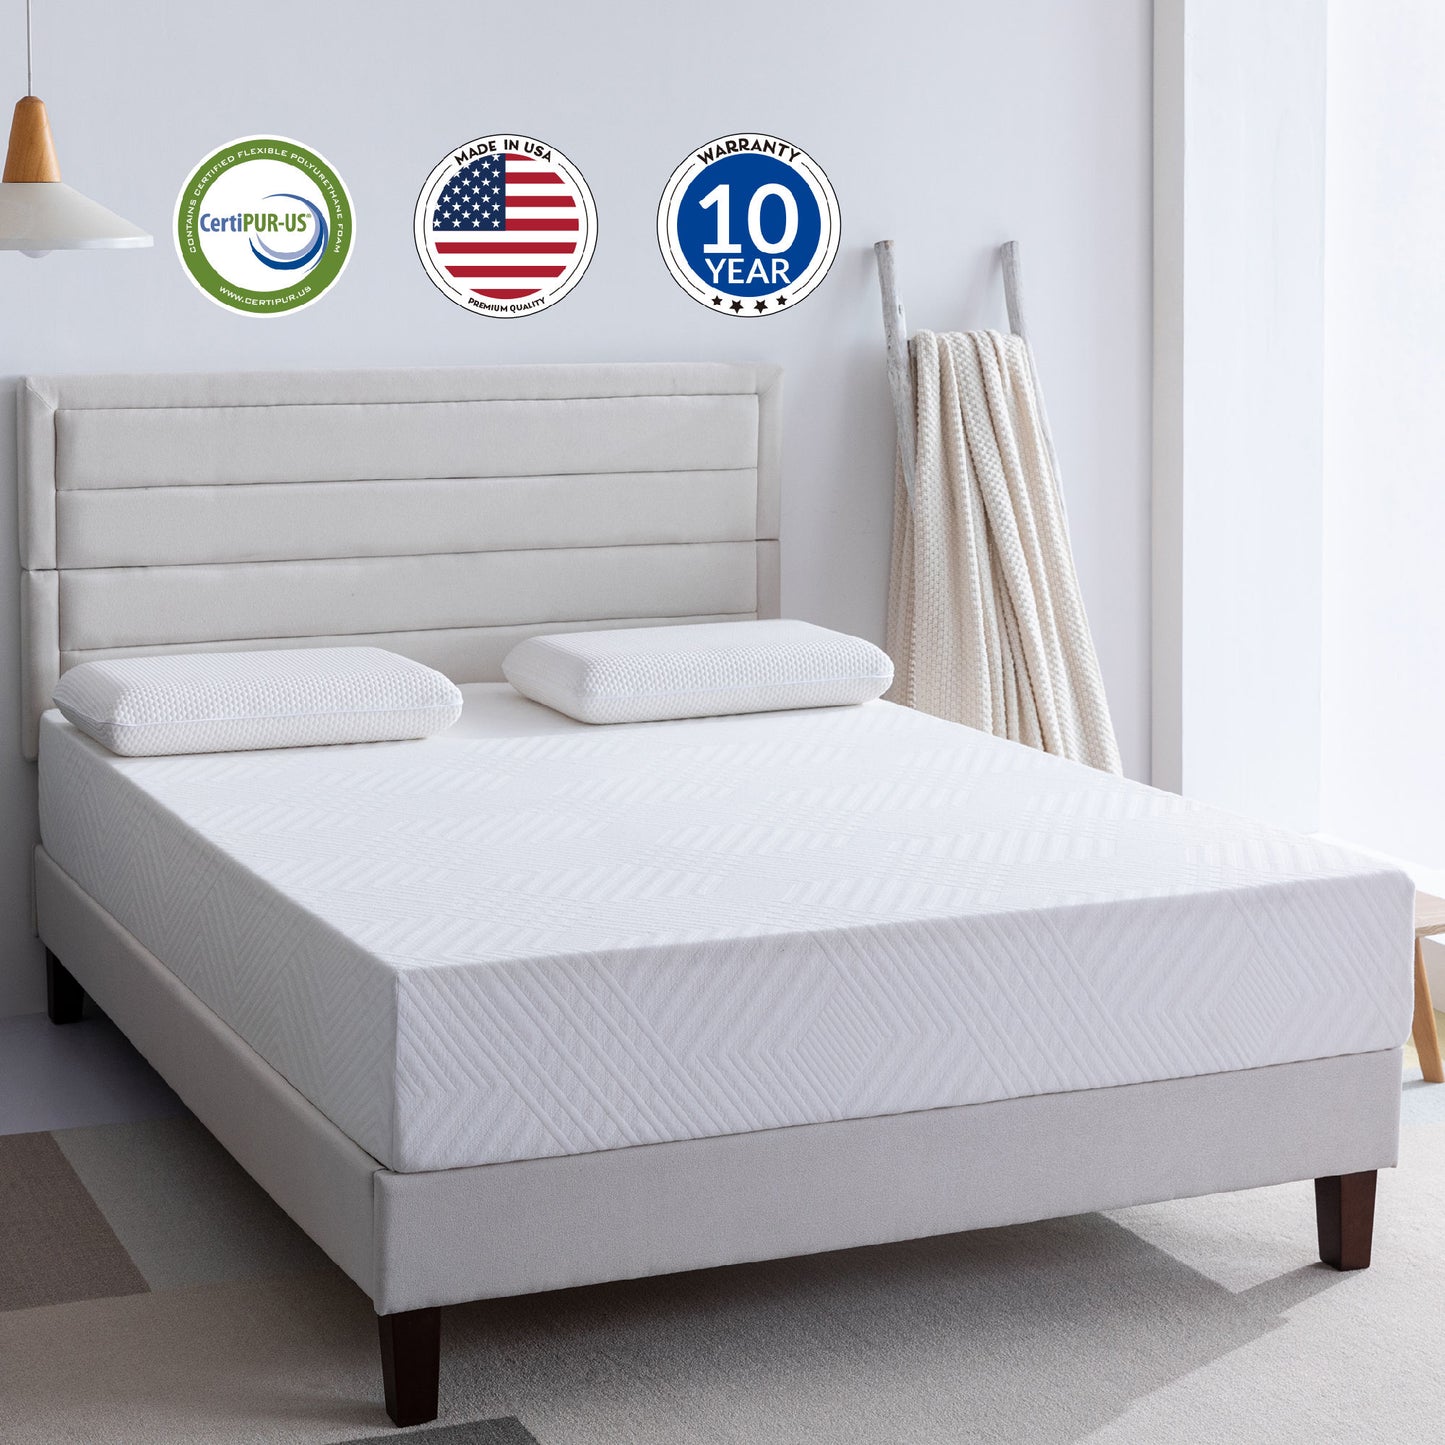 king 10 inch gel memory foam mattress for a cool sleep, bed in a box, green tea infused, certipur-us certified, made in usa